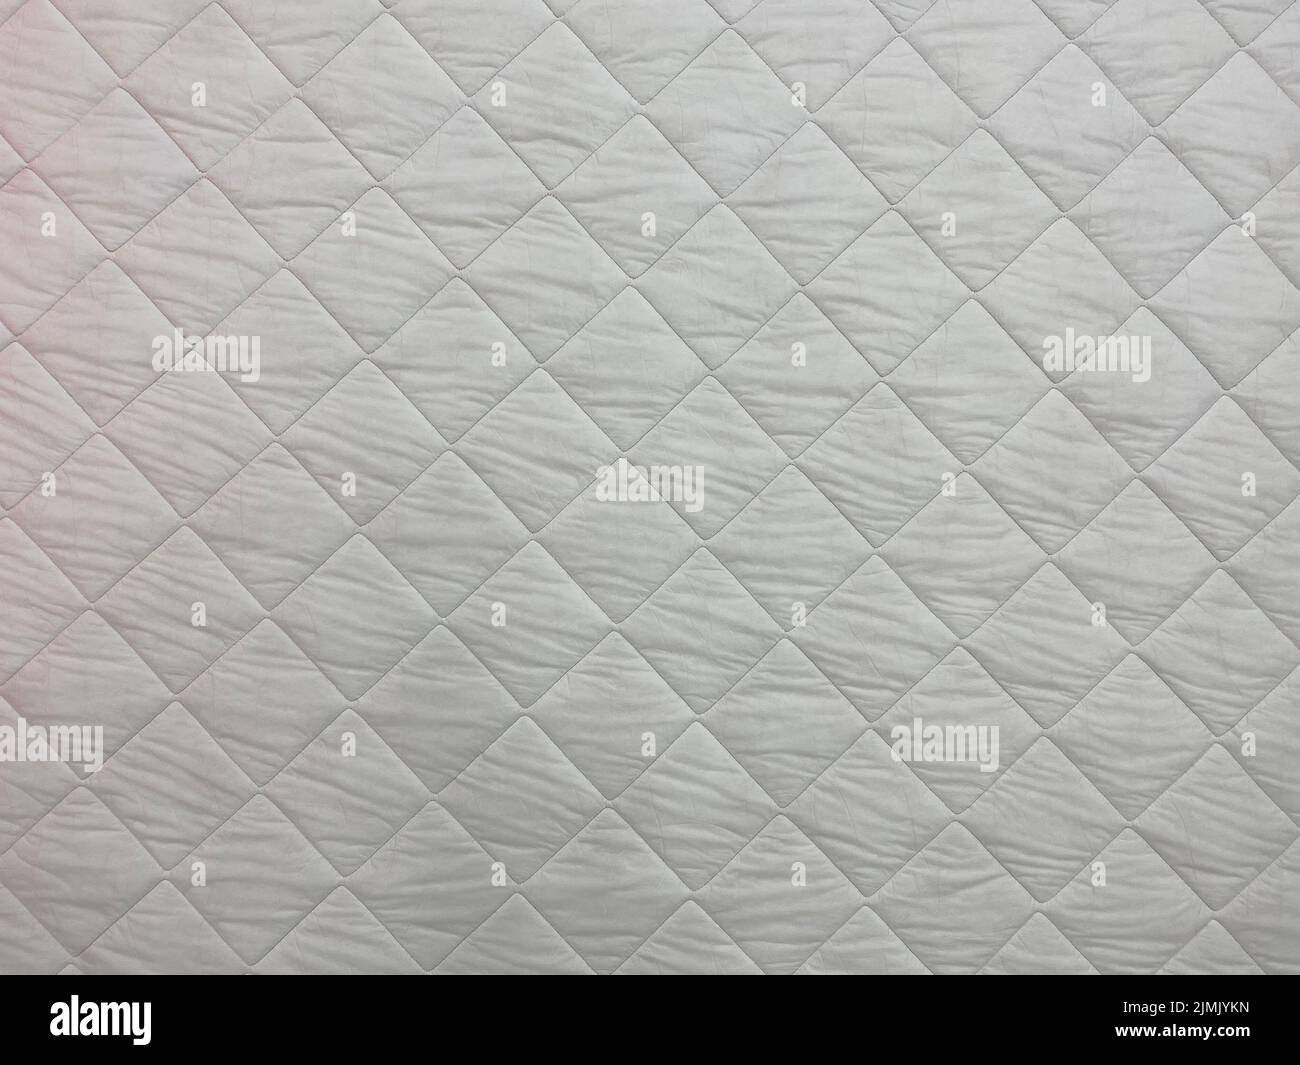 White blanket texture close-up. Blanket texture. Patchwork quilt pattern. White background of square shape. Stock Photo